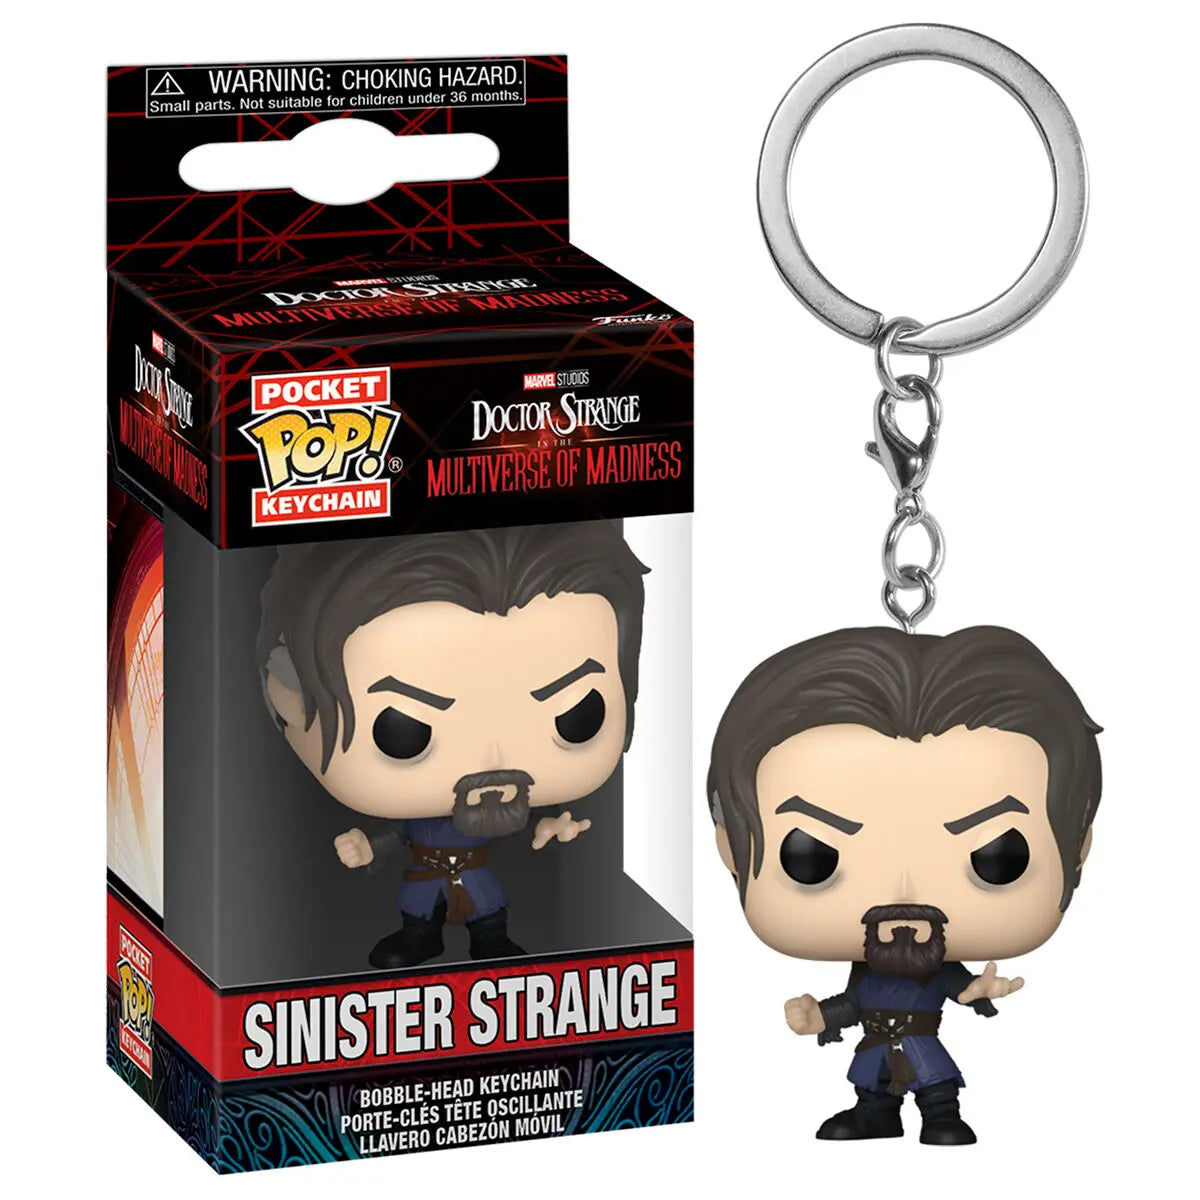 Funko Pop! Keychain Doctor Strange In The Multiverse of Madness - Sinister Strange - BumbleToys - 18+, 4+ Years, 5-7 Years, Action Figures, Boys, Funko, Key Chain, Pre-Order